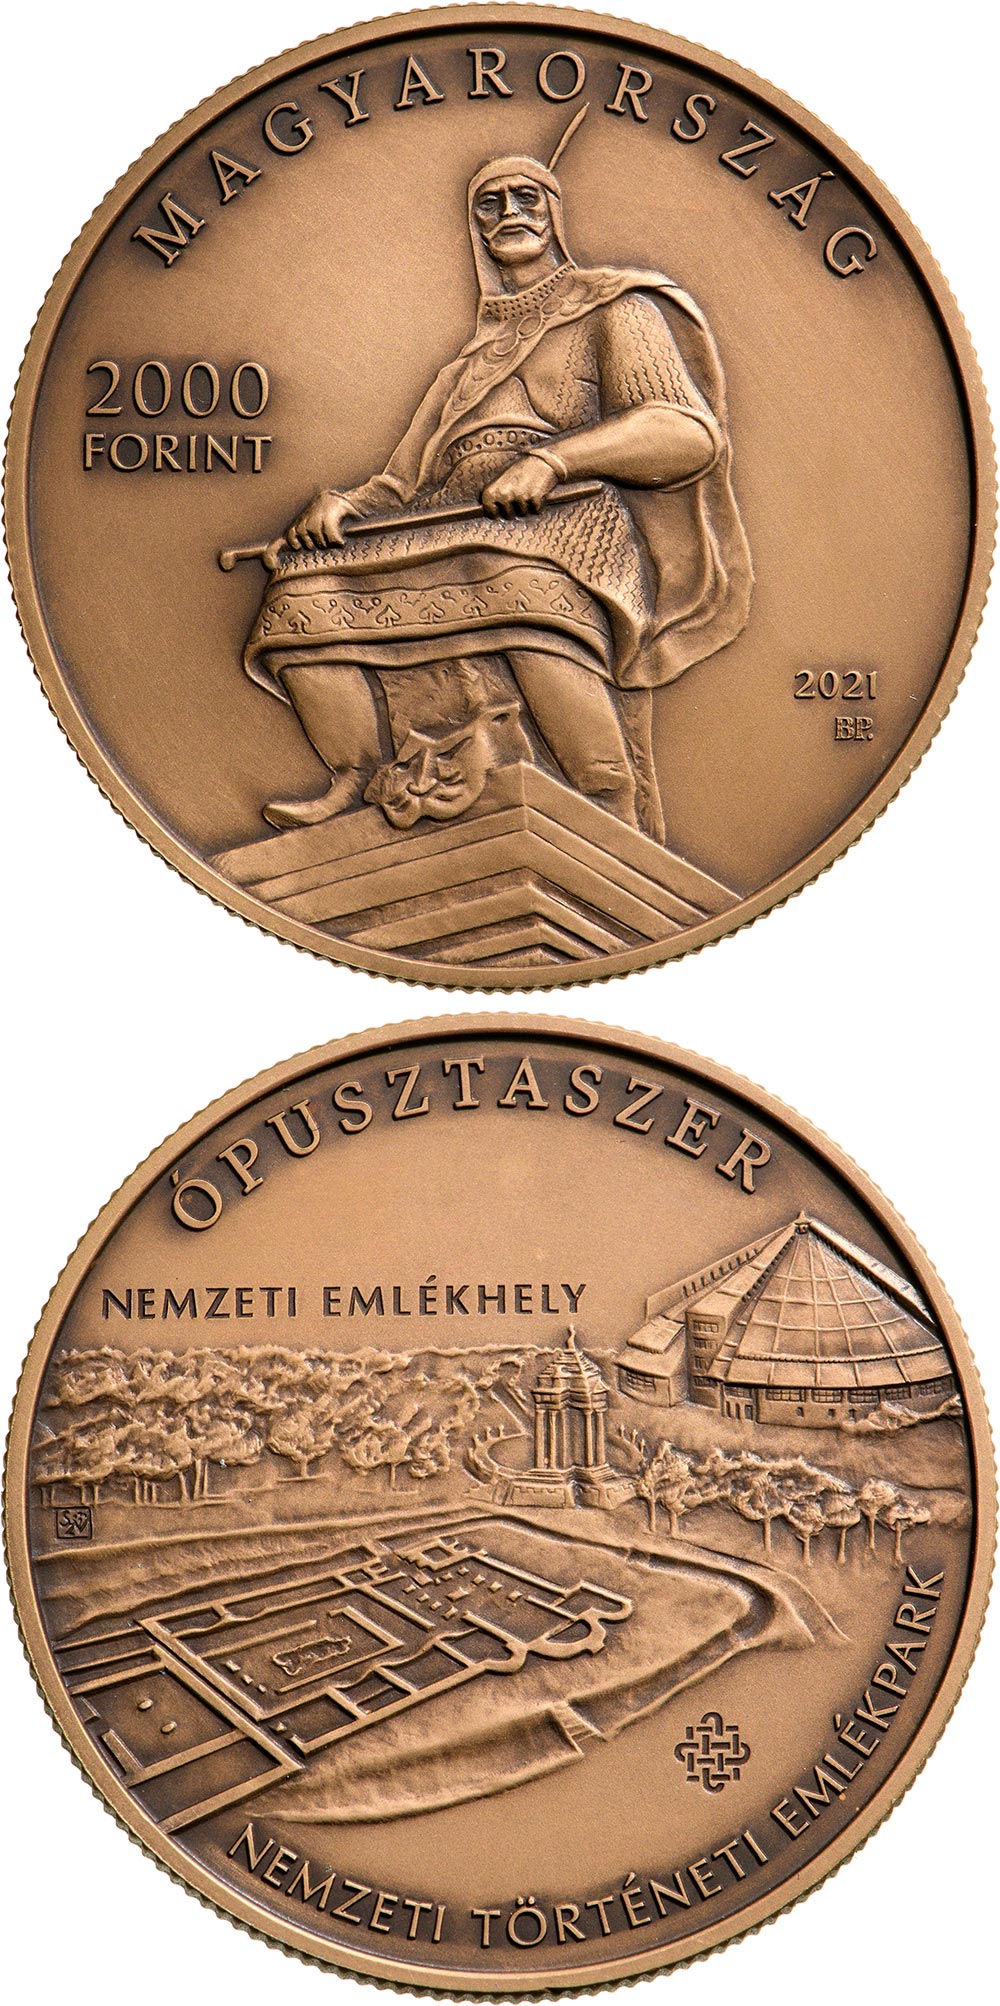 Image of 2000 forint coin - Ópusztaszer Heritage Park | Hungary 2021.  The Brass coin is of BU quality.